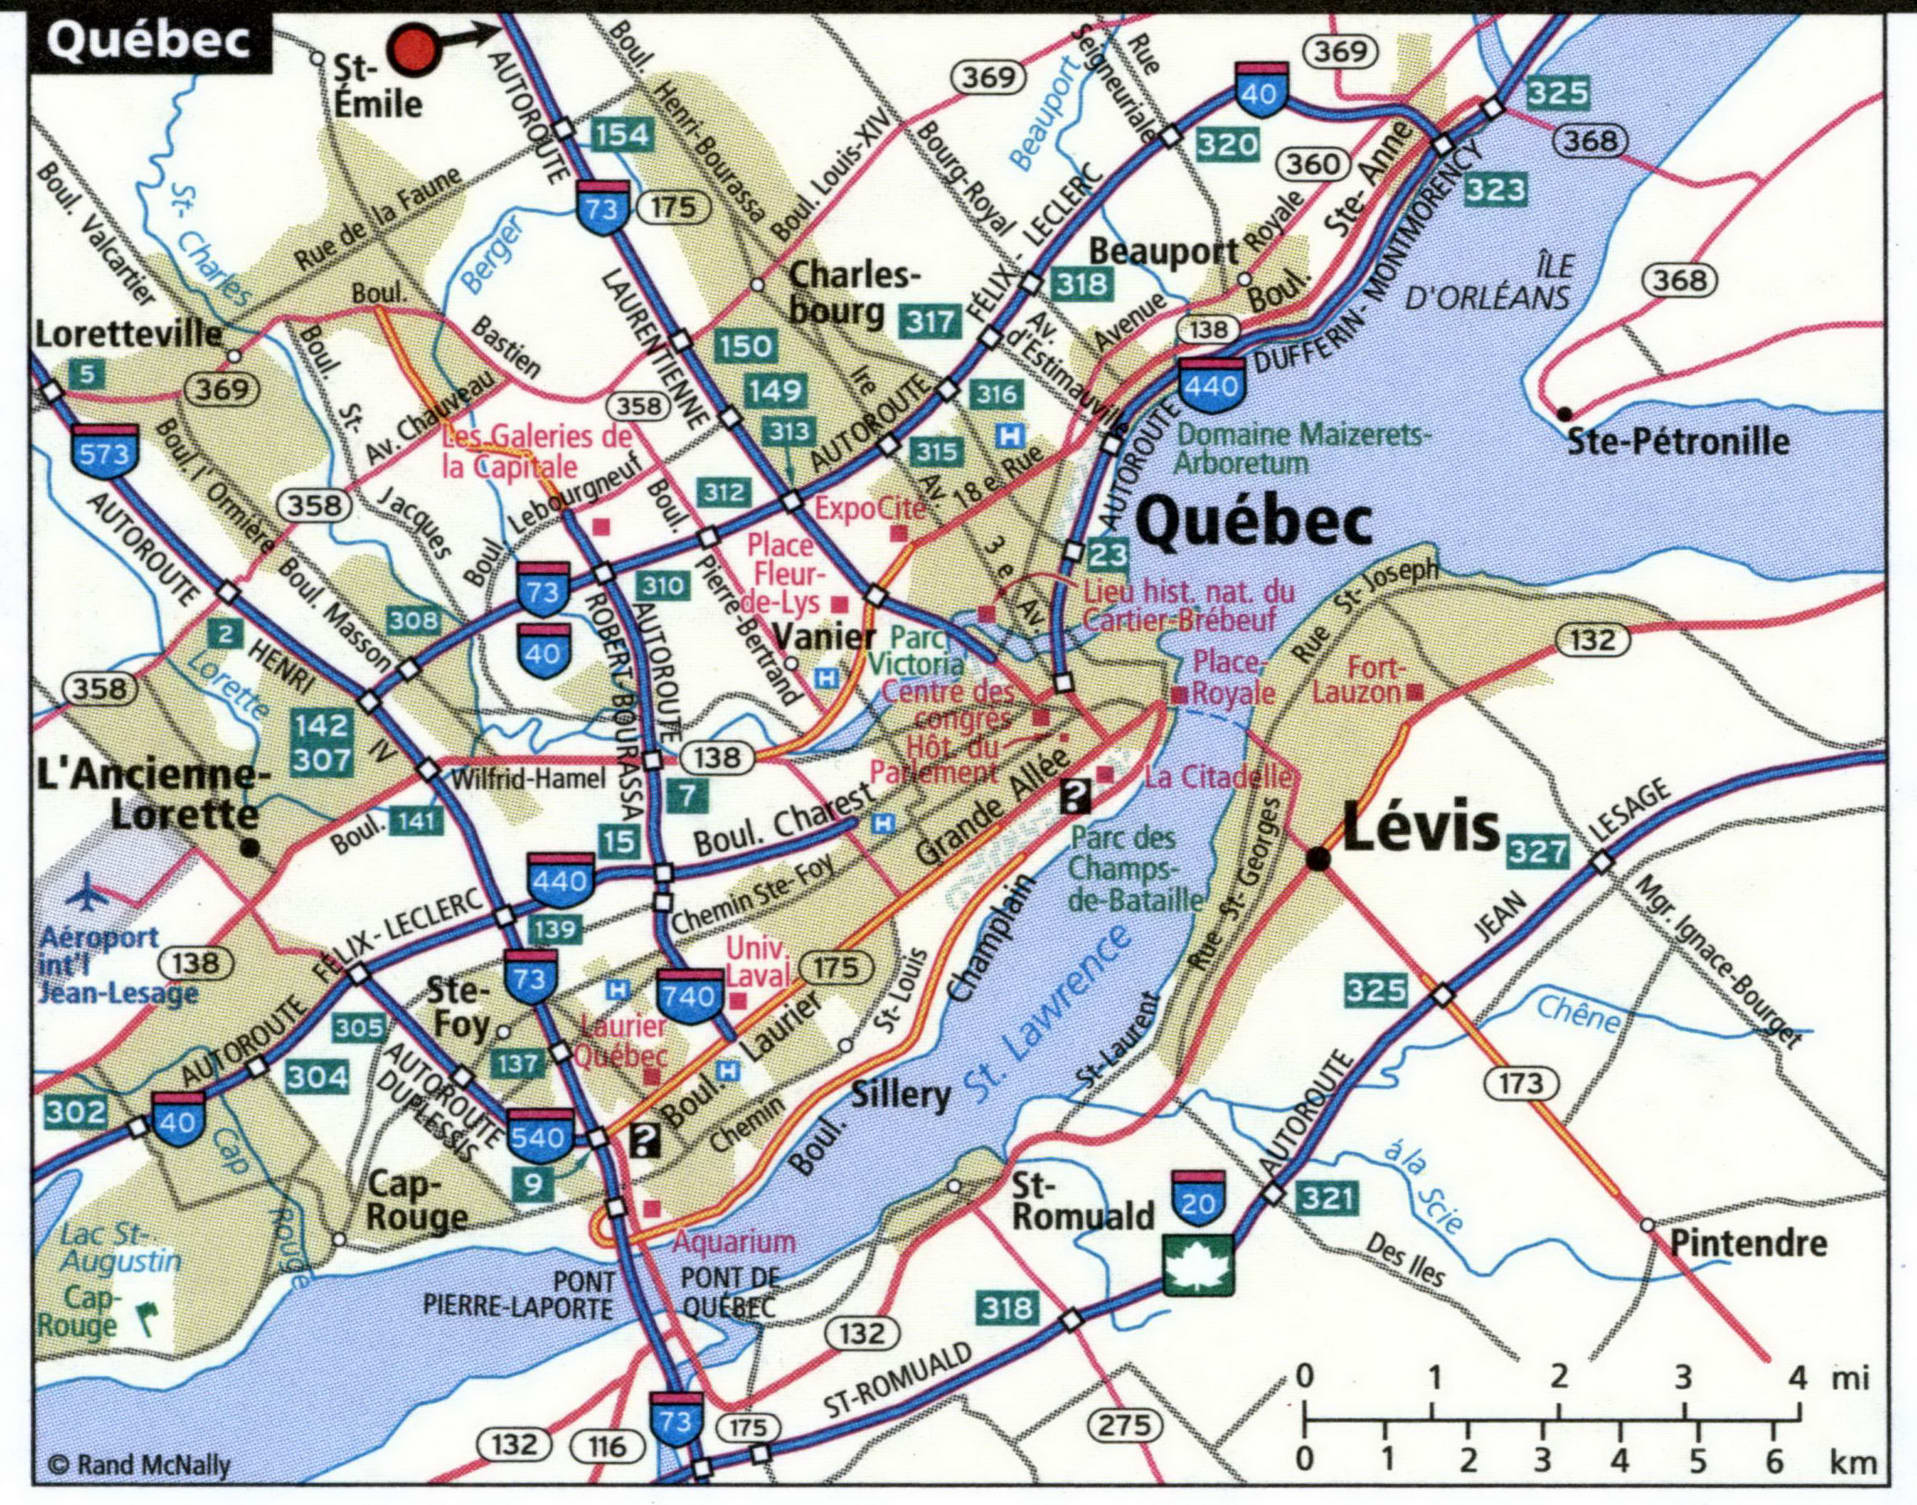 Quebec city map for truckers